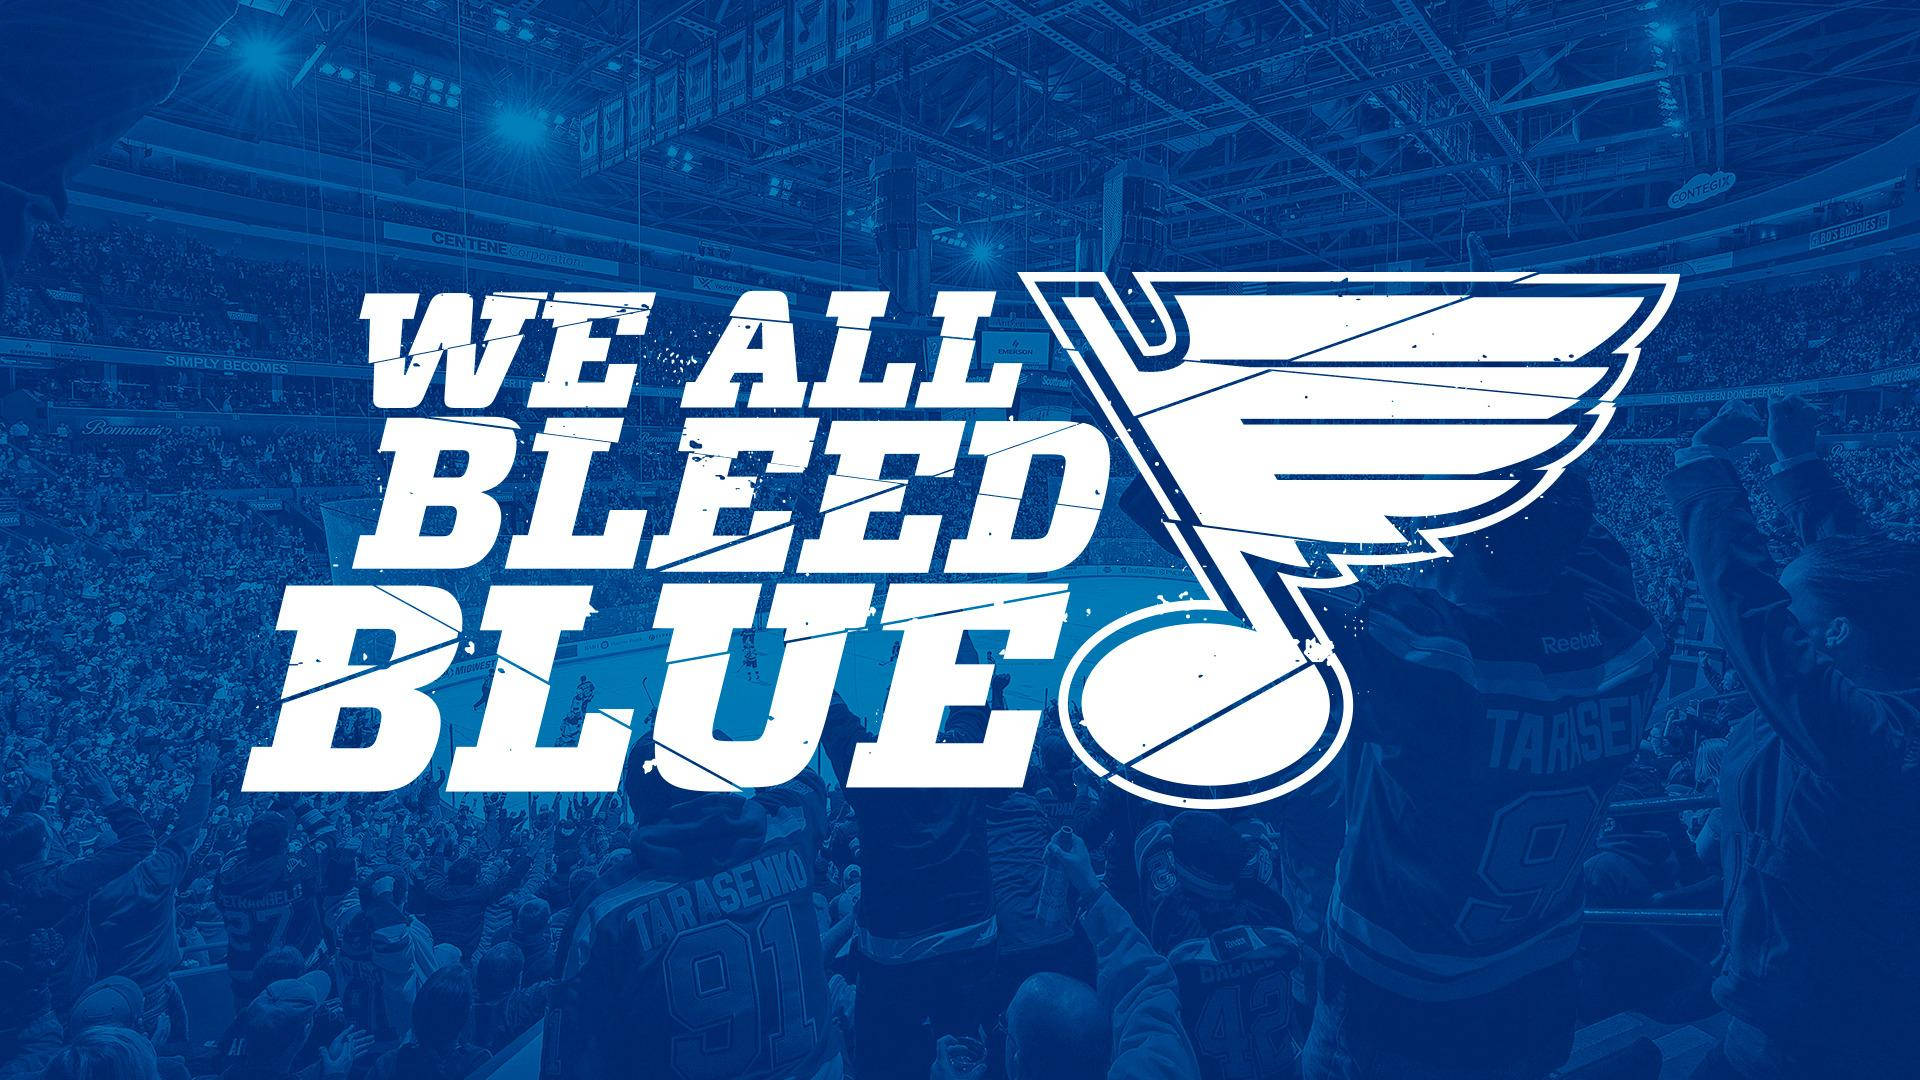 St Louis Blues Bleed Blue Banner Background